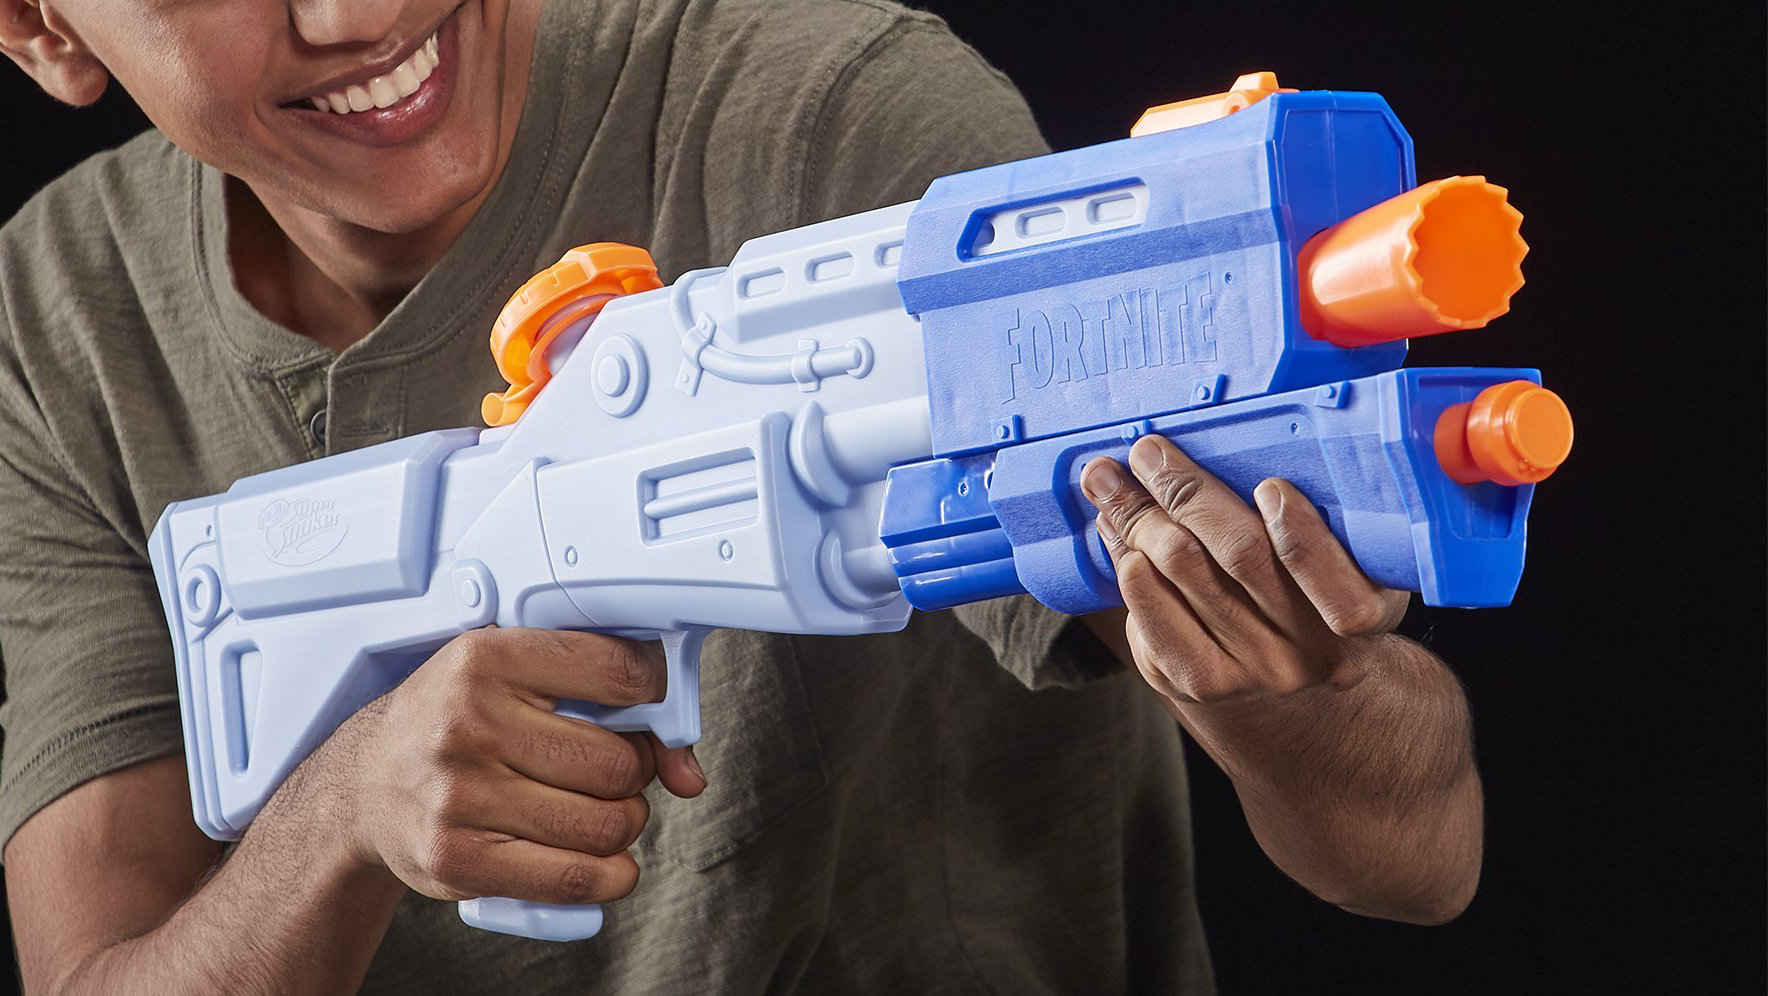 it was inevitable that companies would get on the fortnite bandwagon given its massive popularity the game continues to enjoy substantial success leading - nerf fortnite llama microshots dart firing blaster